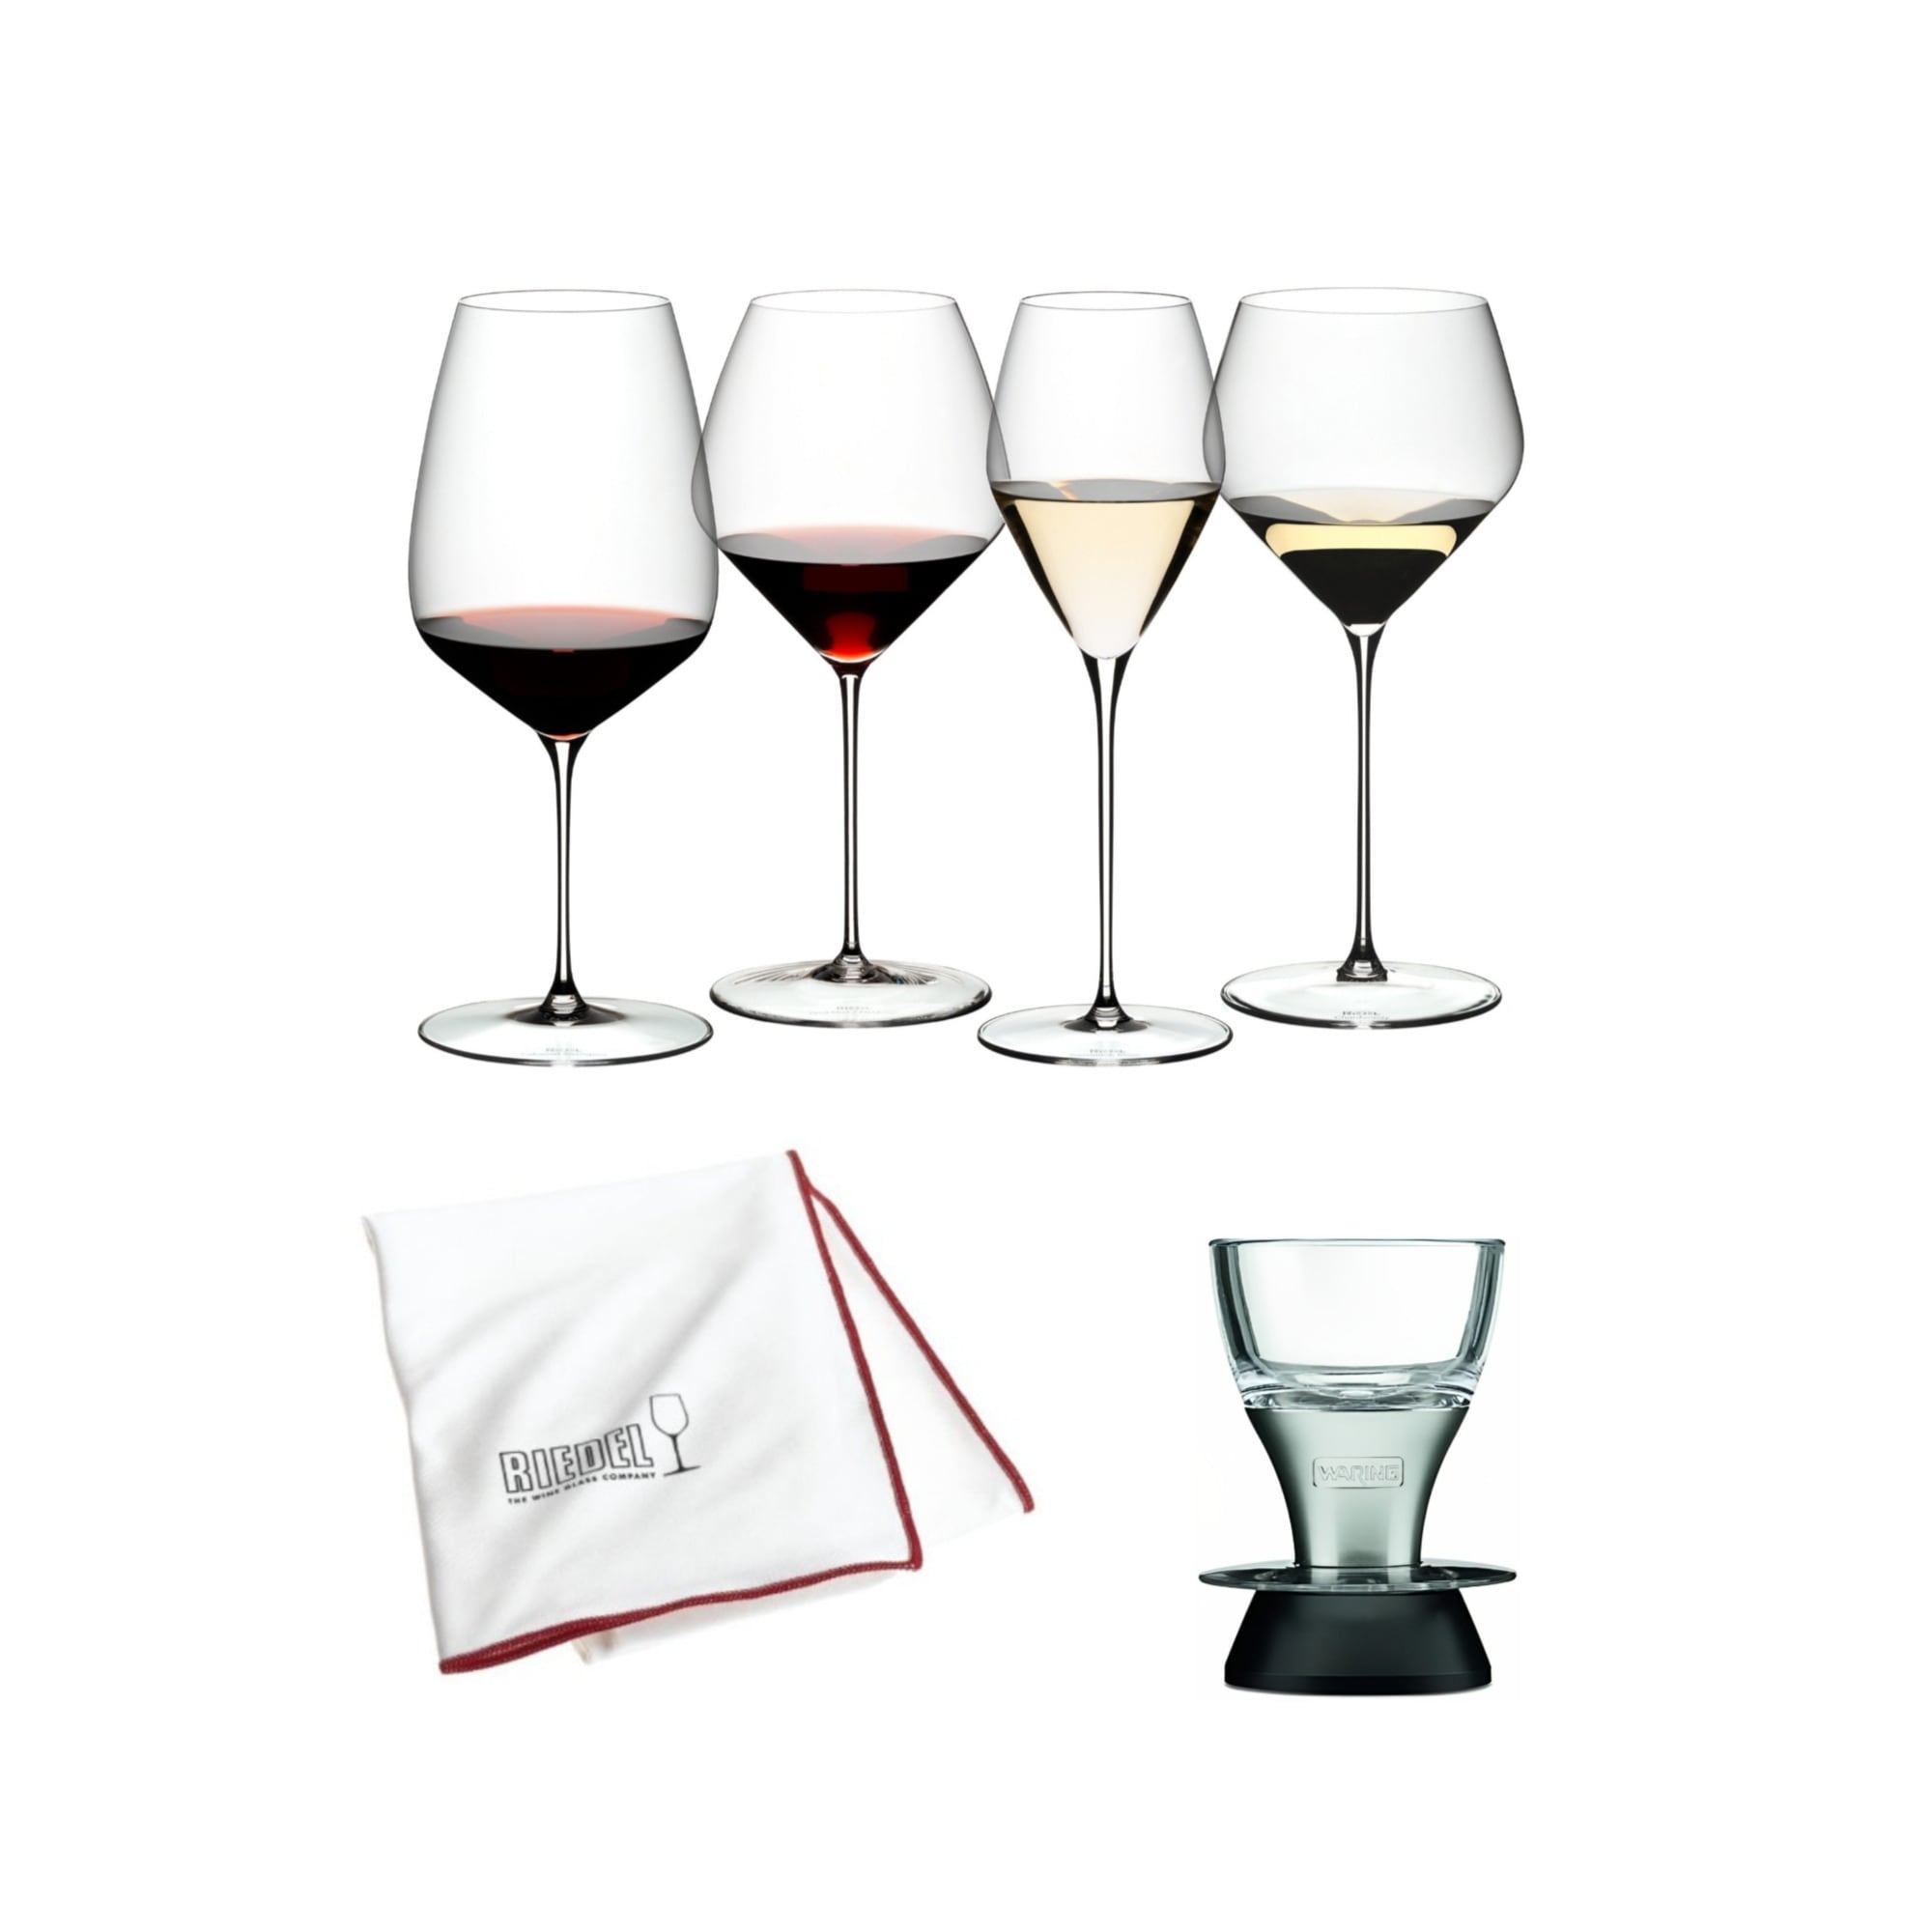 How To Pack Wine Glasses and Stemware